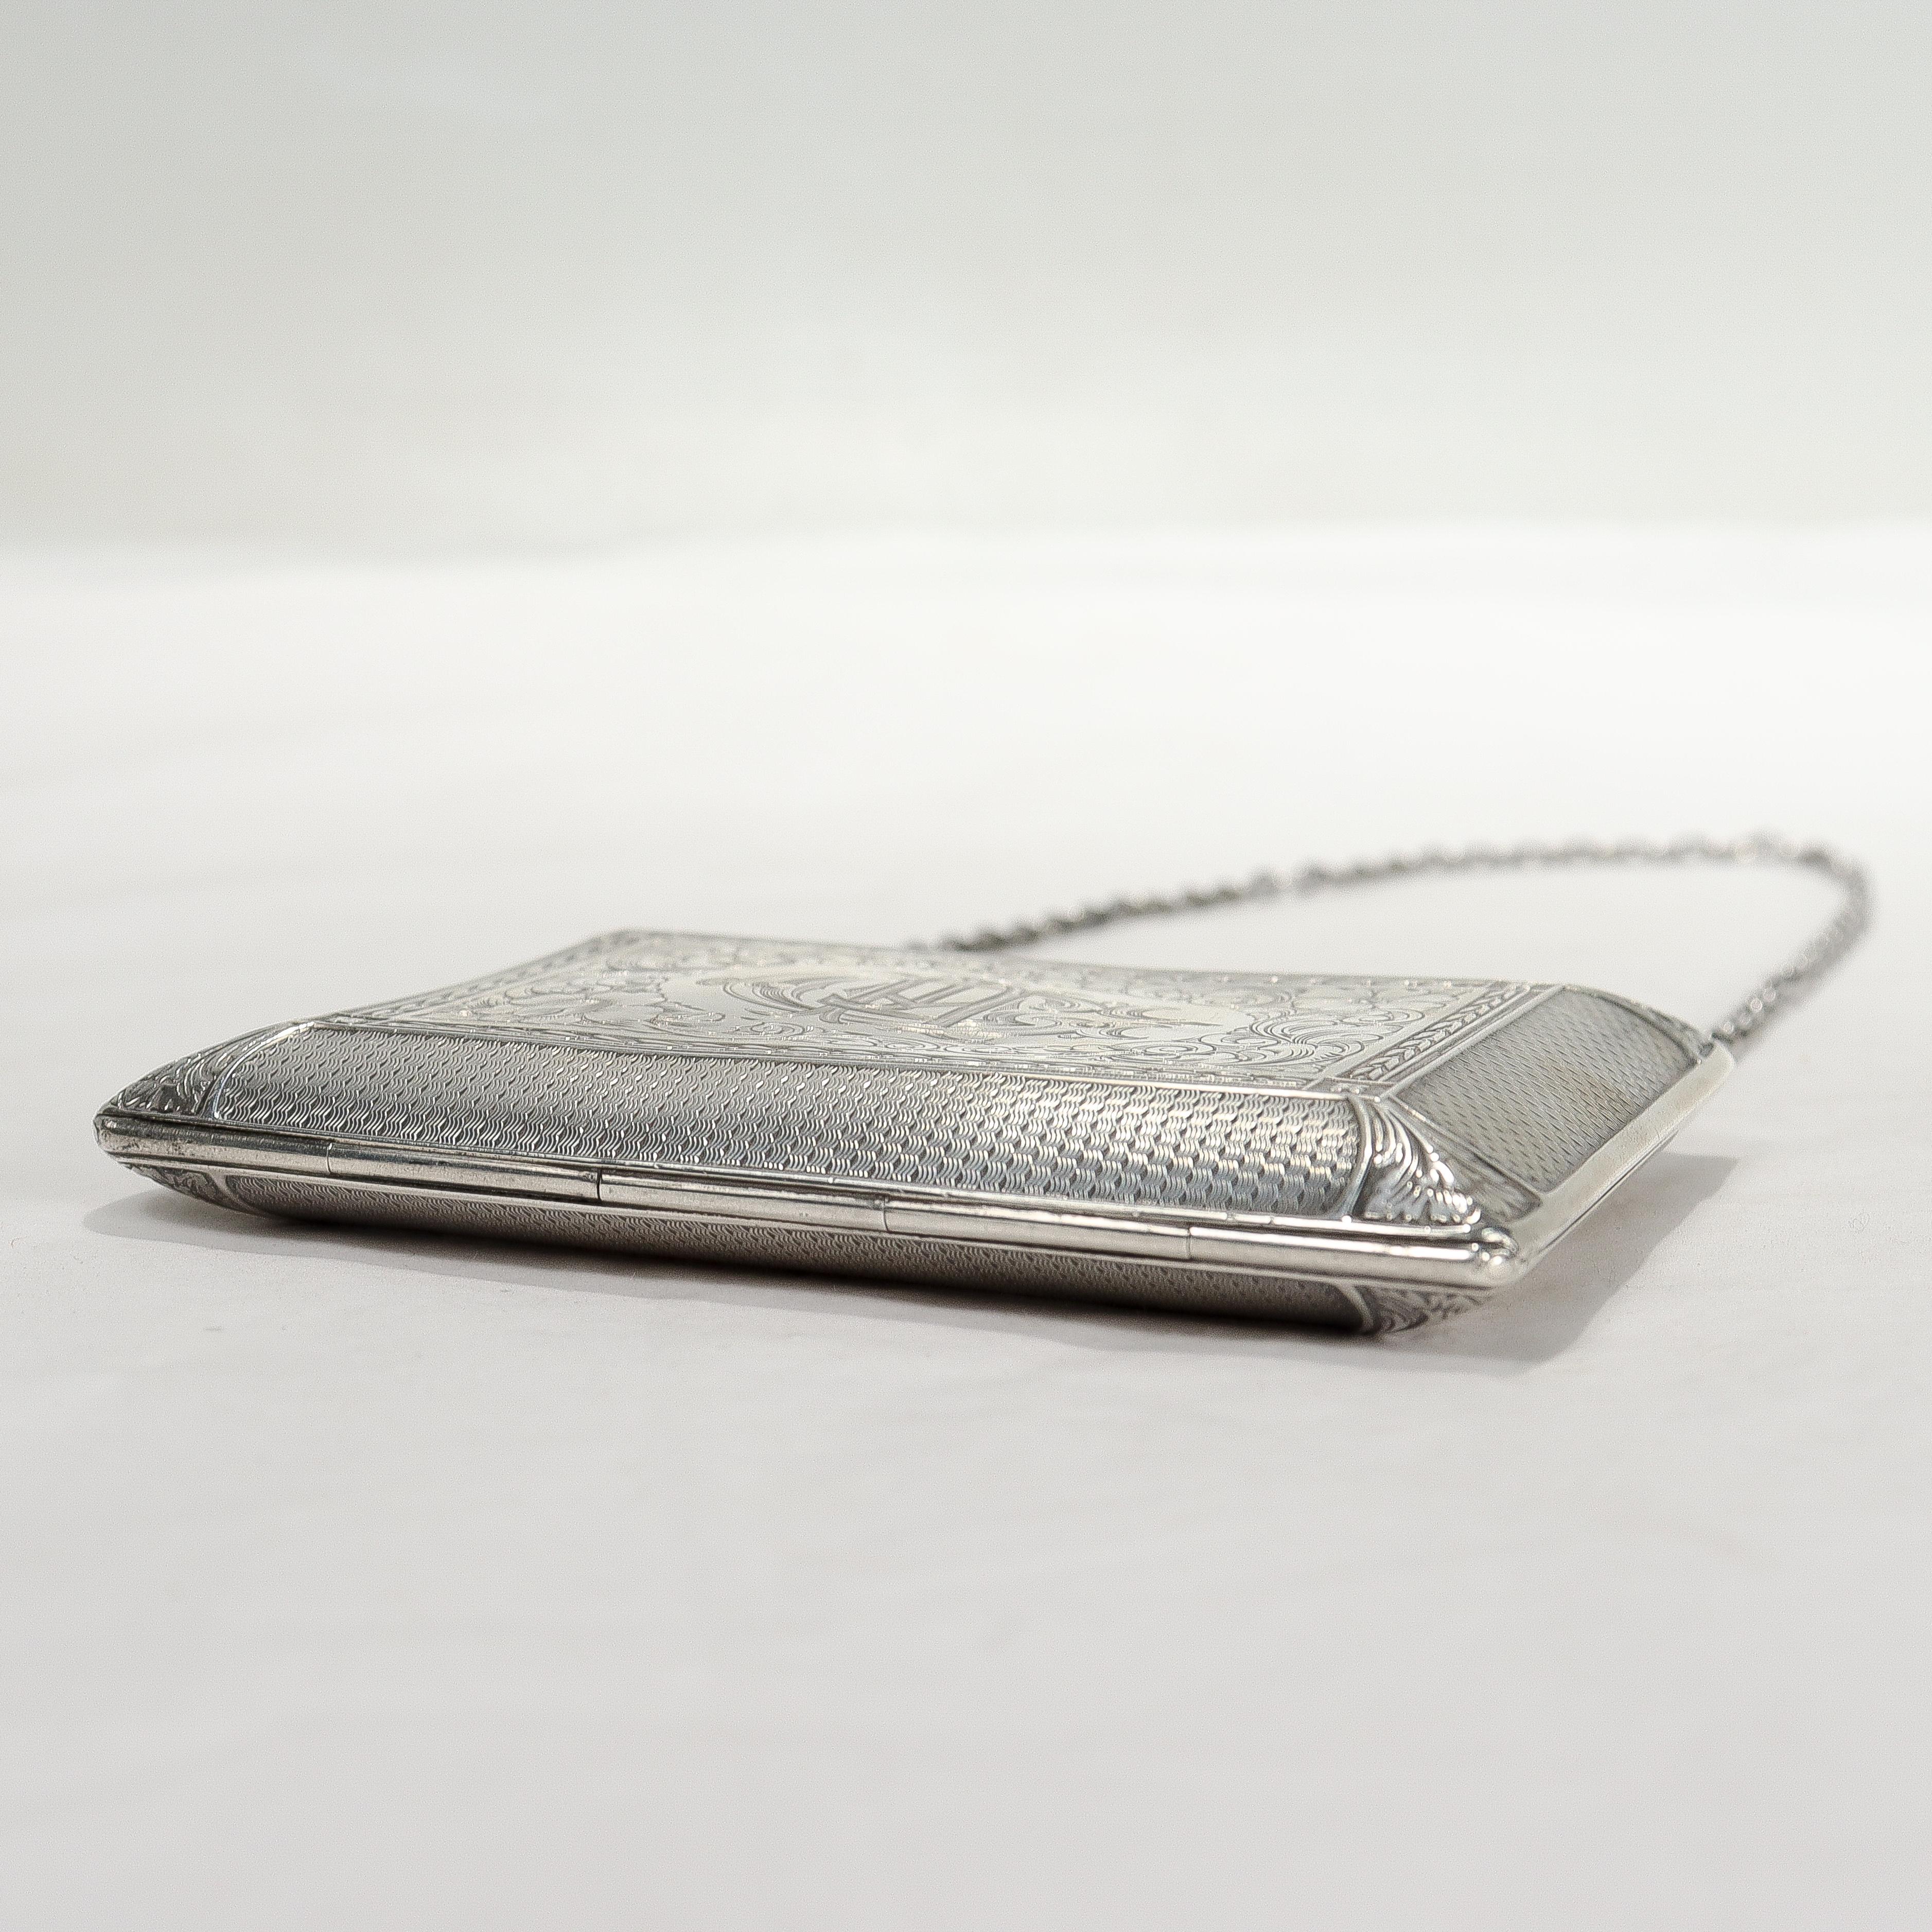 Antique Edwardian William B Kerr Sterling Silver Purse or Lady's Evening Bag For Sale 4